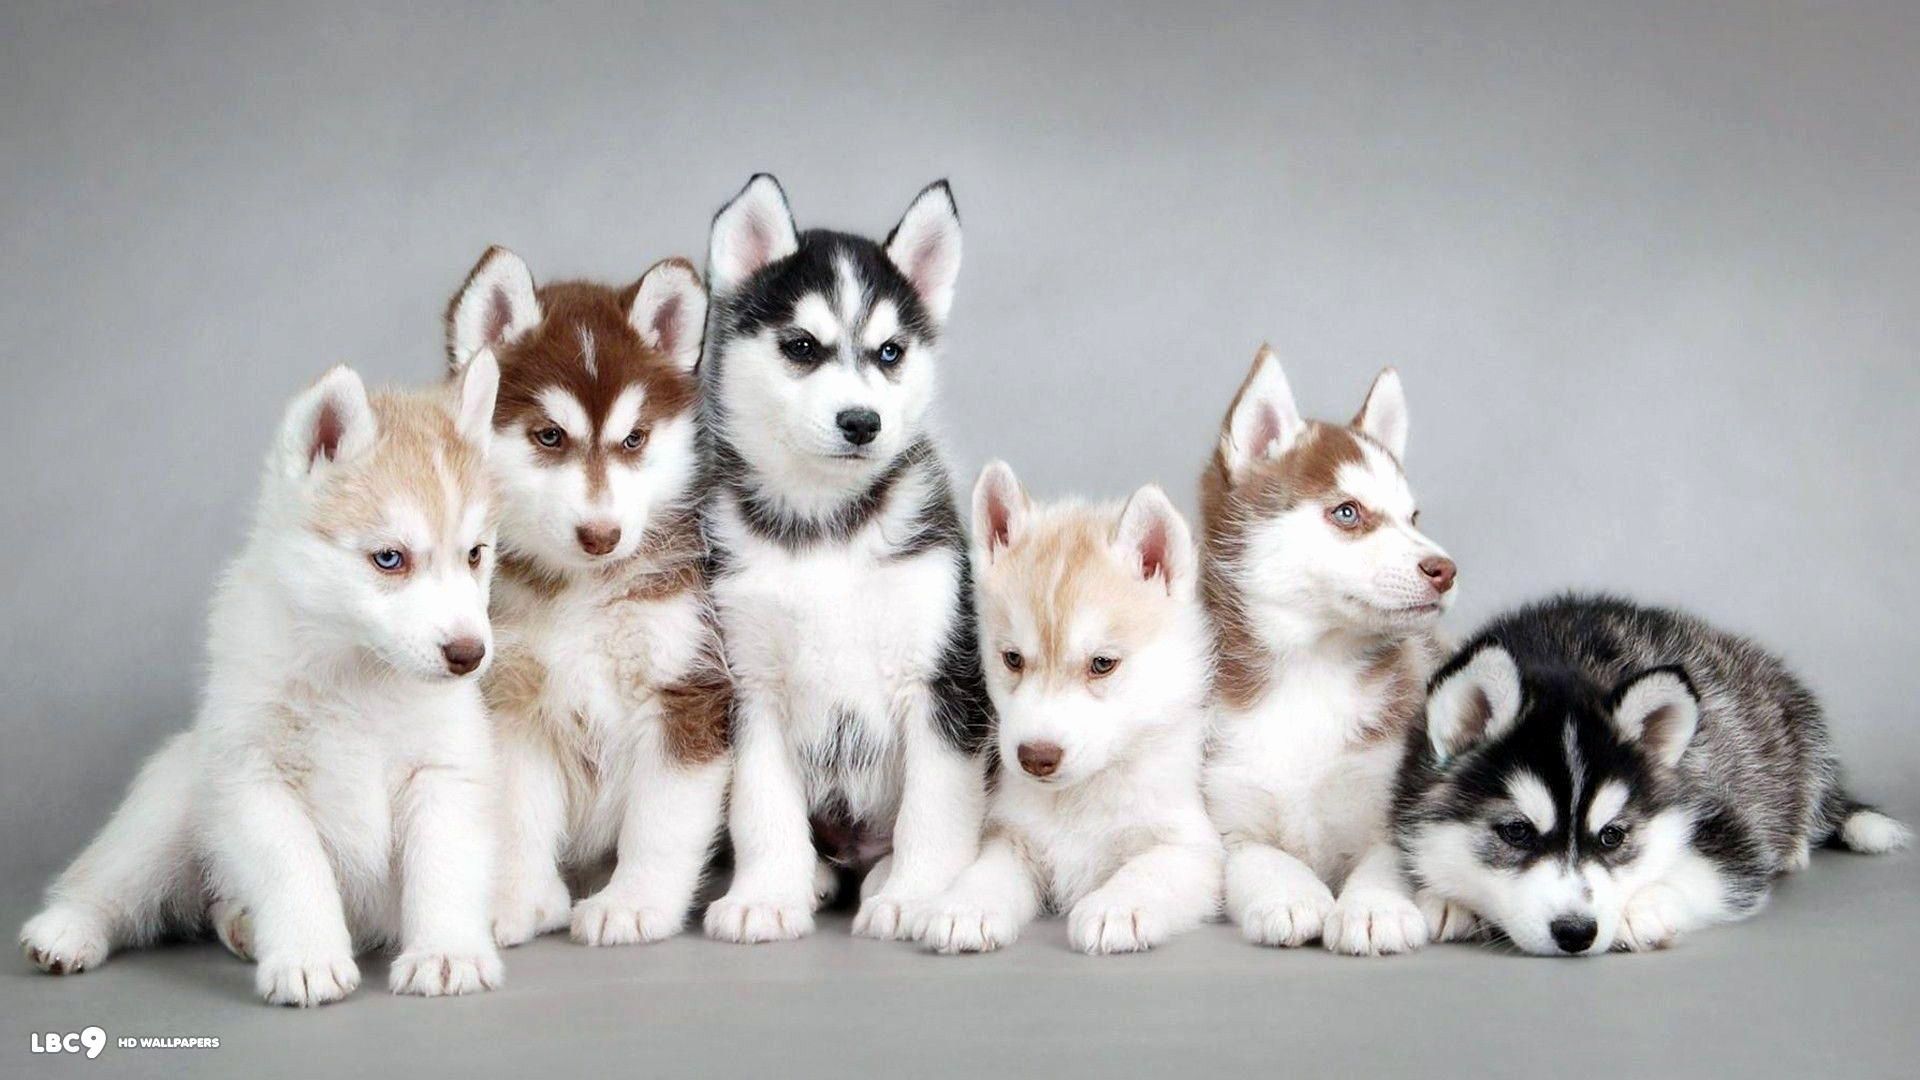 Baby Husky Wallpapers Beautiful Cute Baby Animals Siberian Husky Wallpapers Hd – Backgrounds Wallpapers Hd Combination